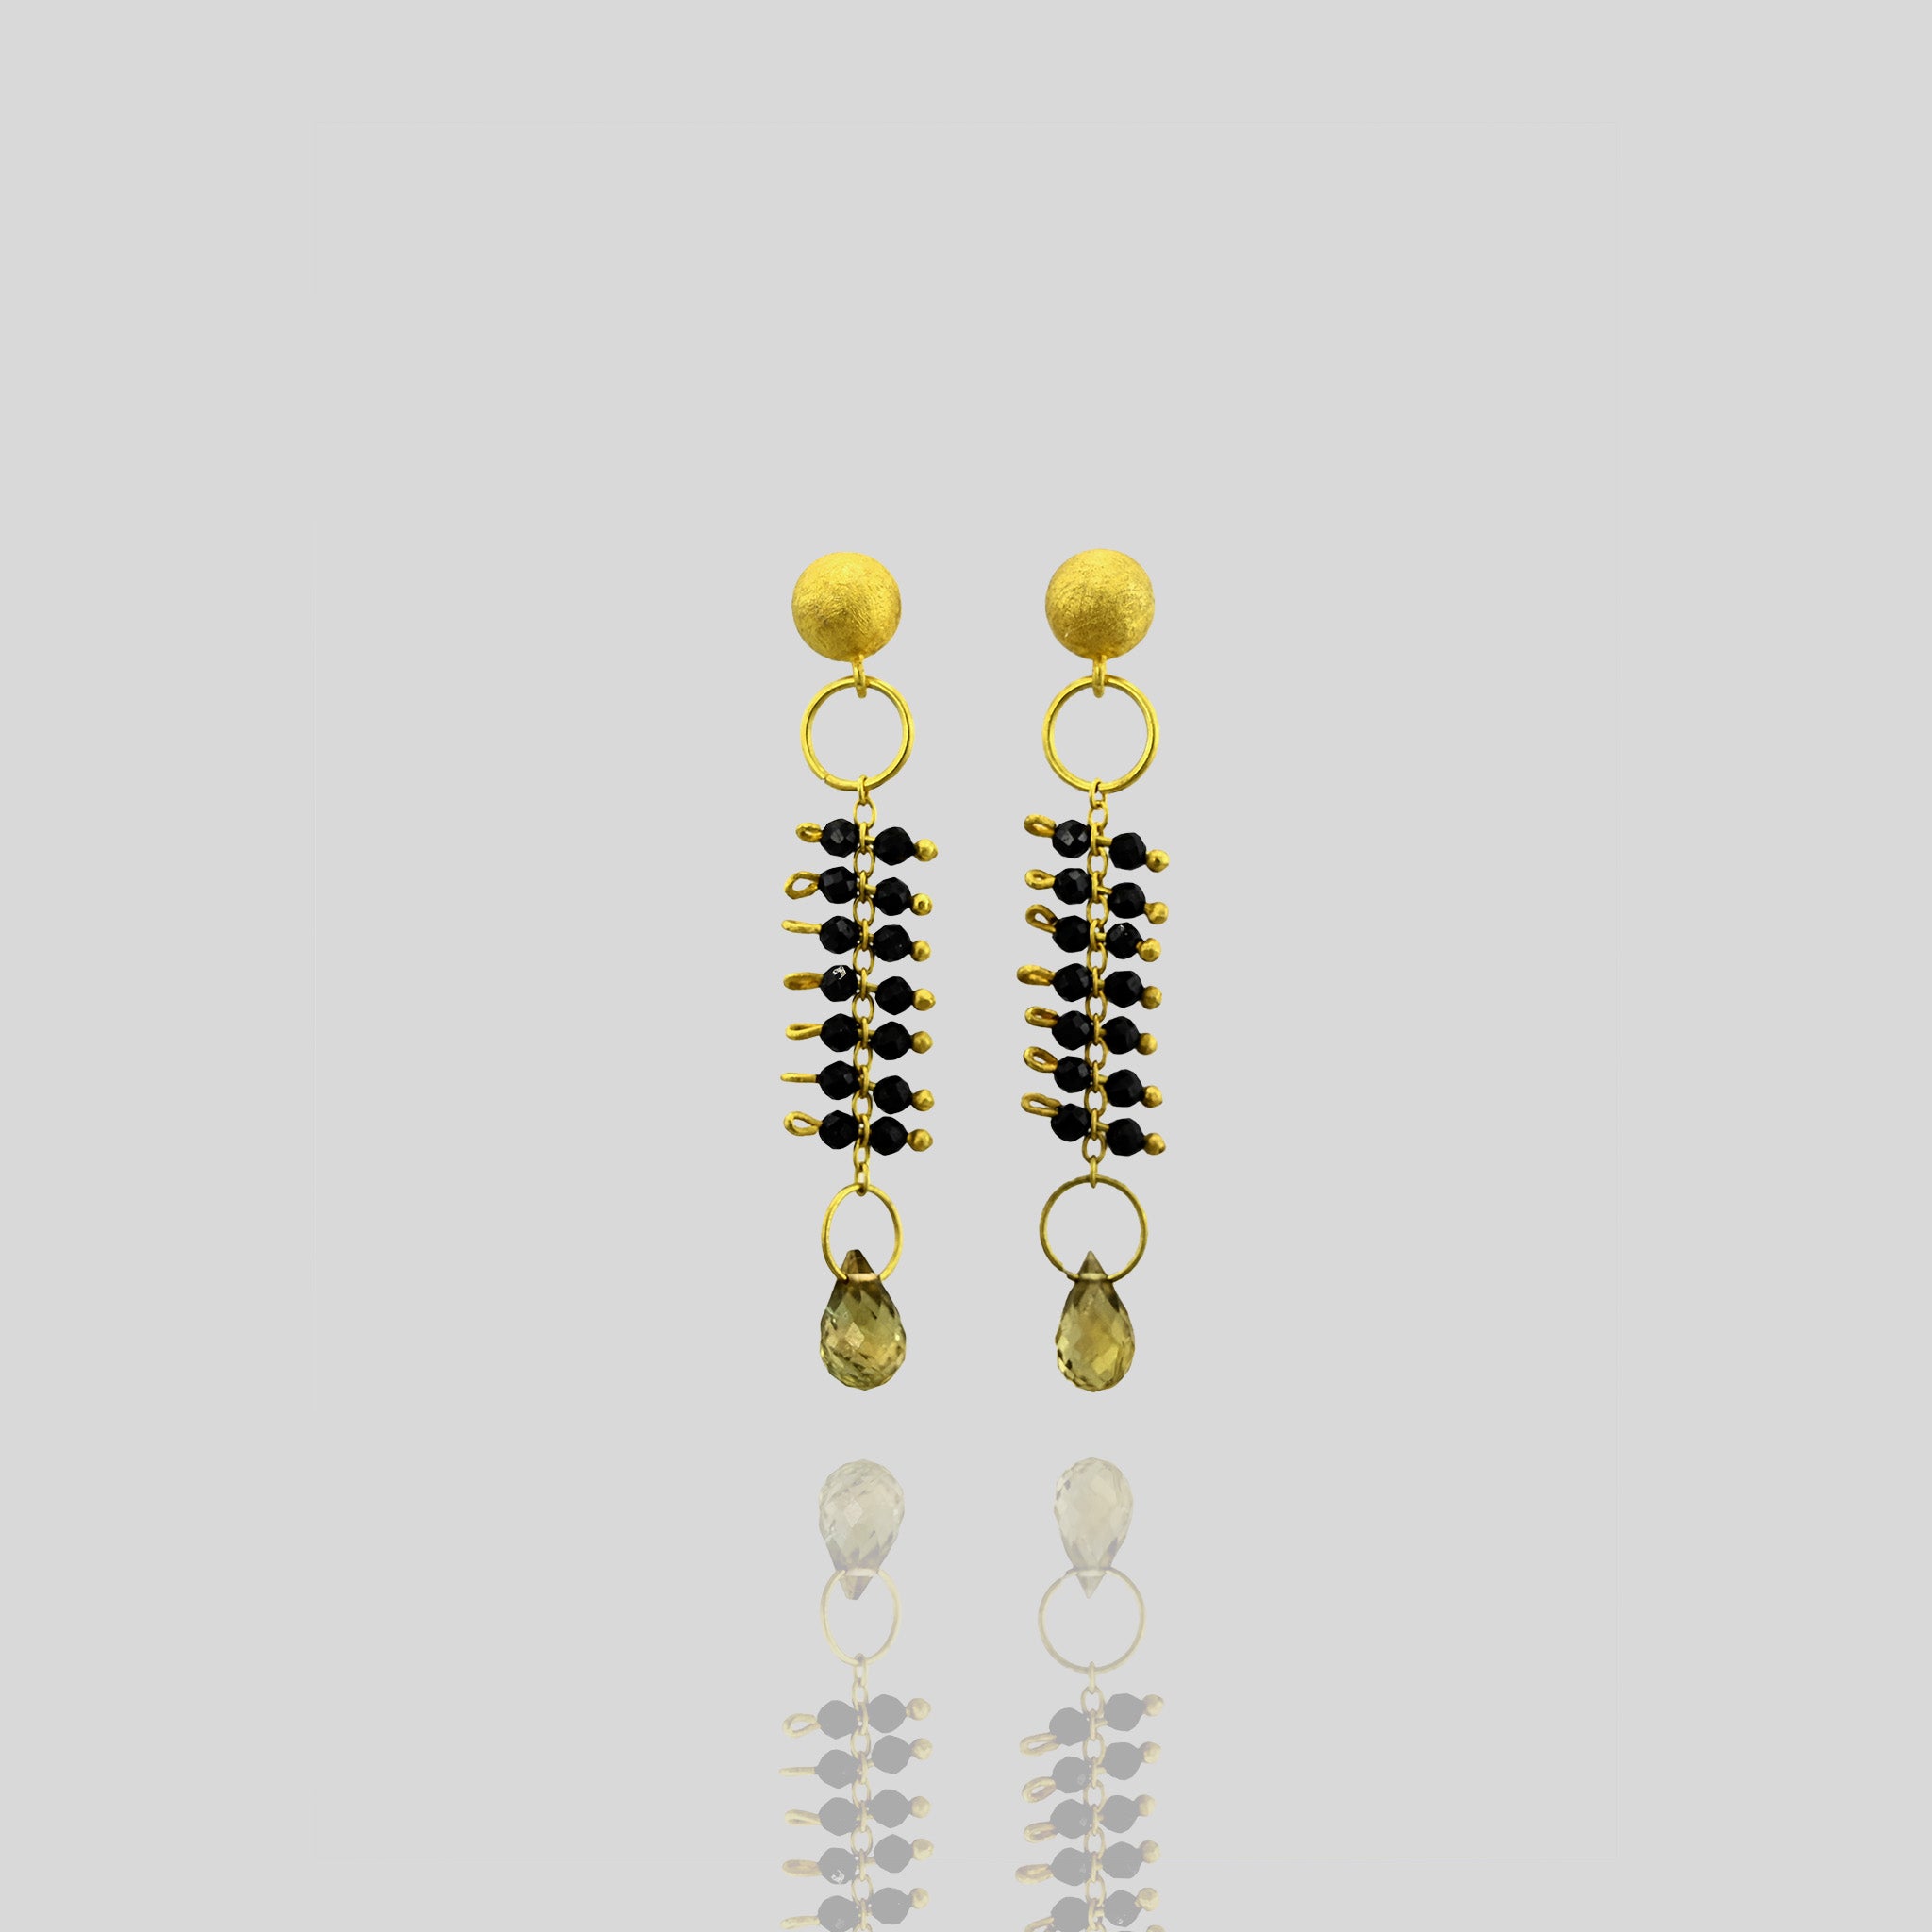 Venus Gold Earrings with Onyx Beads & Drop-Shaped Tourmaline - Inspired by the Sea Goddess, with Delicate Gold Threads.